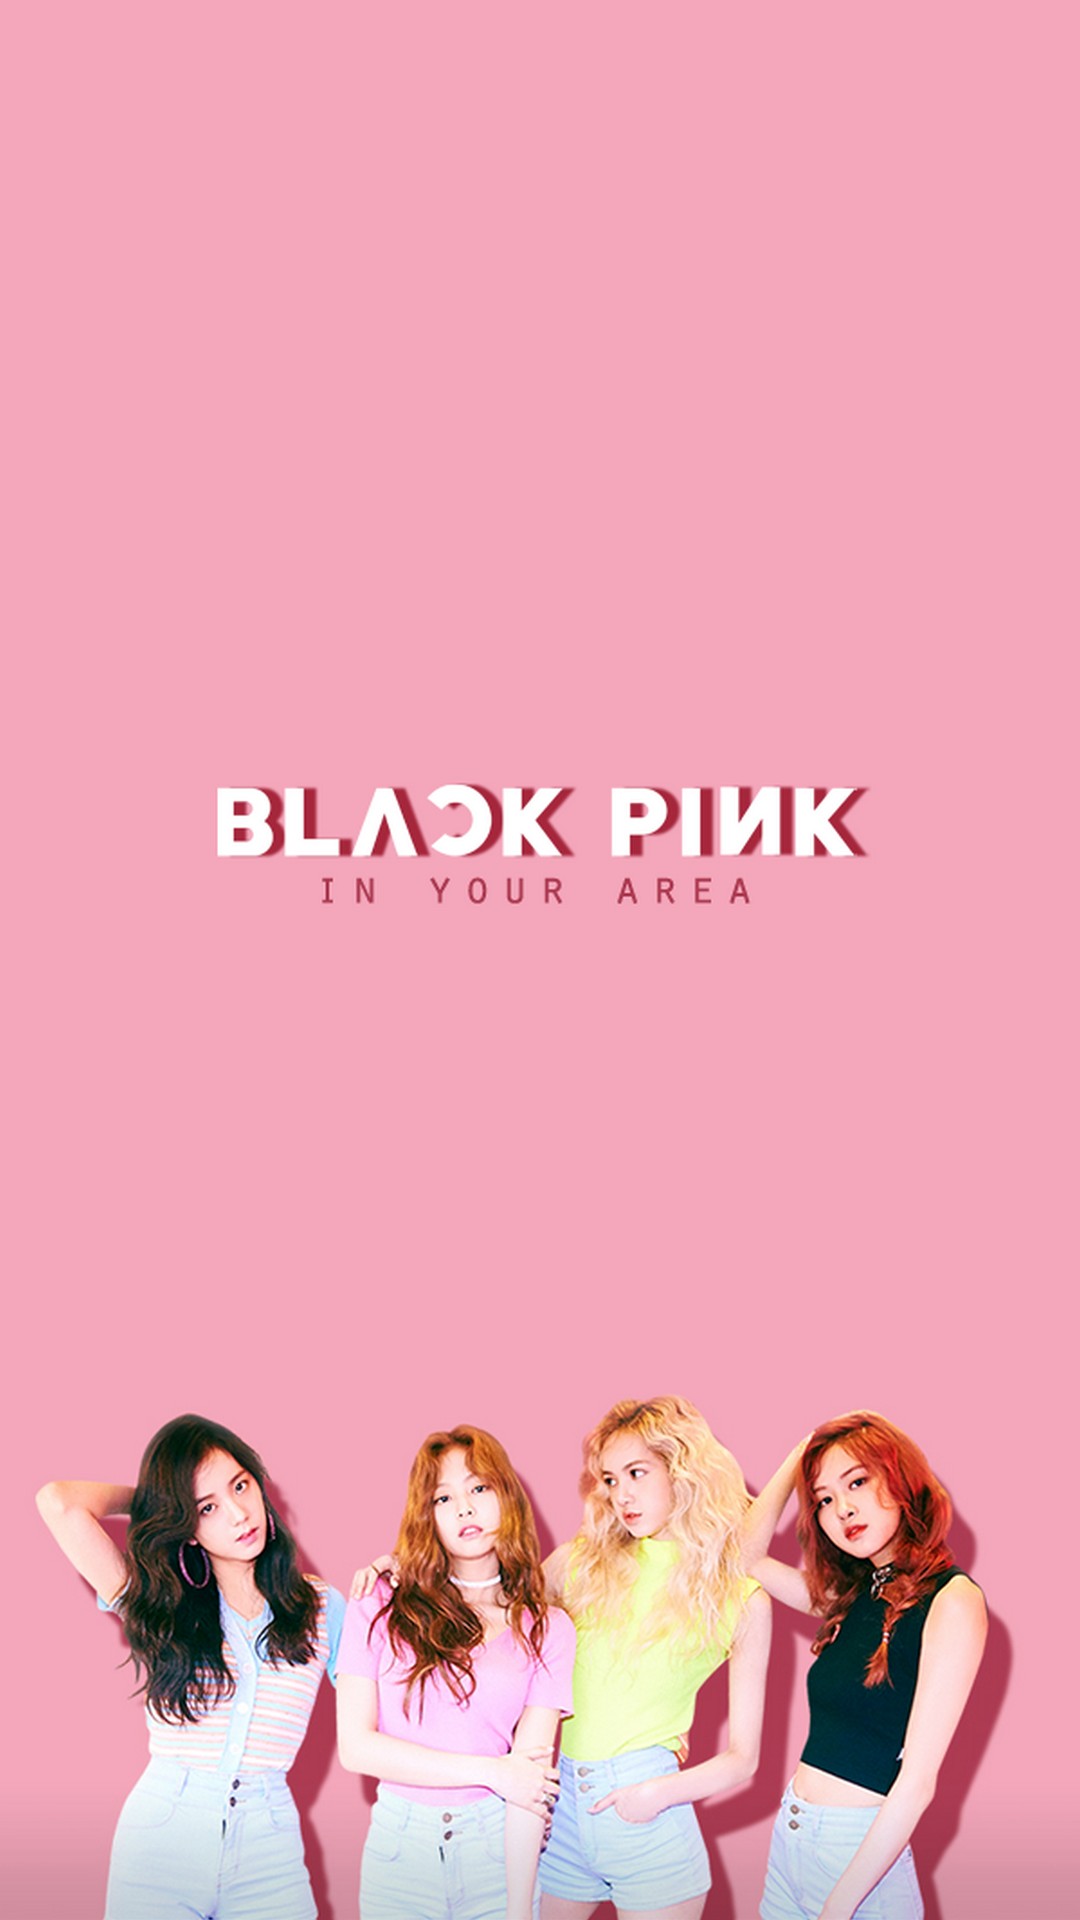 Blackpink iPhone Wallpaper with high-resolution 1080x1920 pixel. You can set as wallpaper for Apple iPhone X, XS Max, XR, 8, 7, 6, SE, iPad. Enjoy and share your favorite HD wallpapers and background images